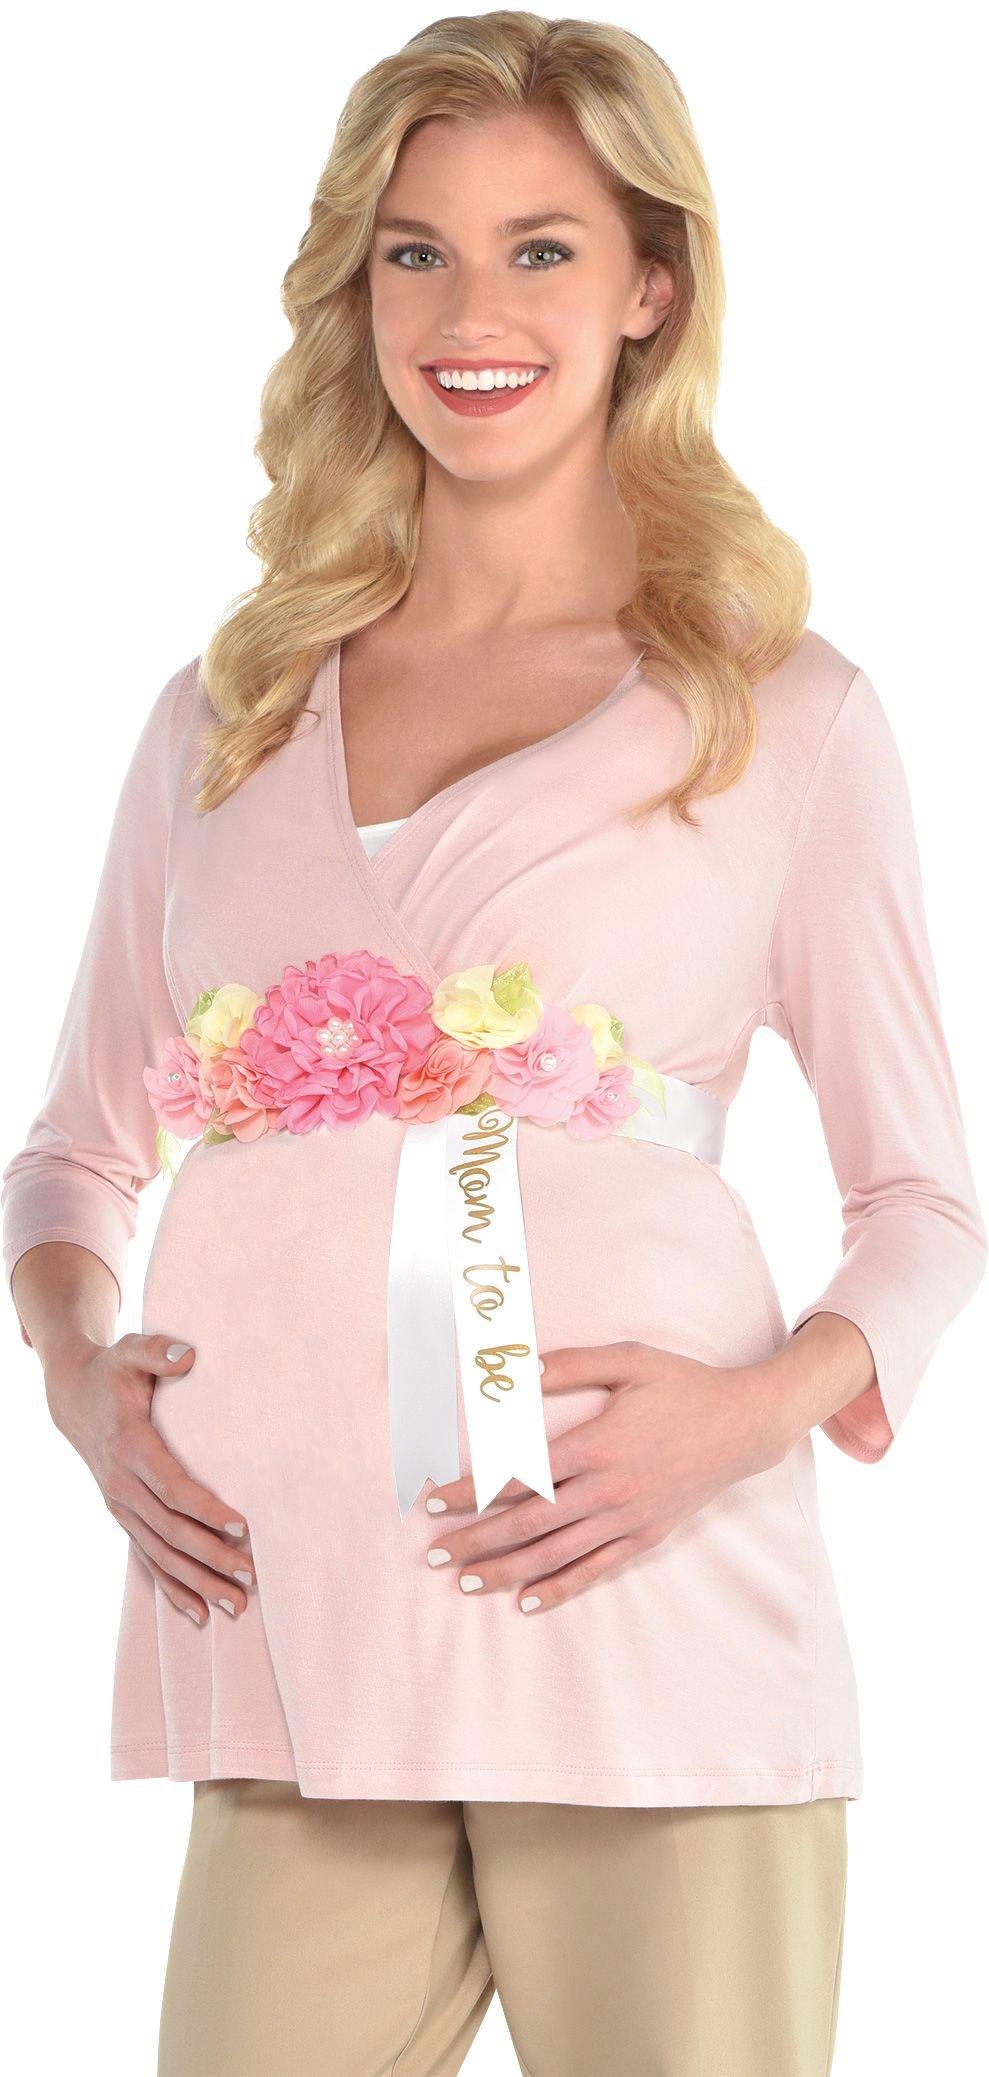 Floral Baby Shower Mom-to-Be Ribbon Sash